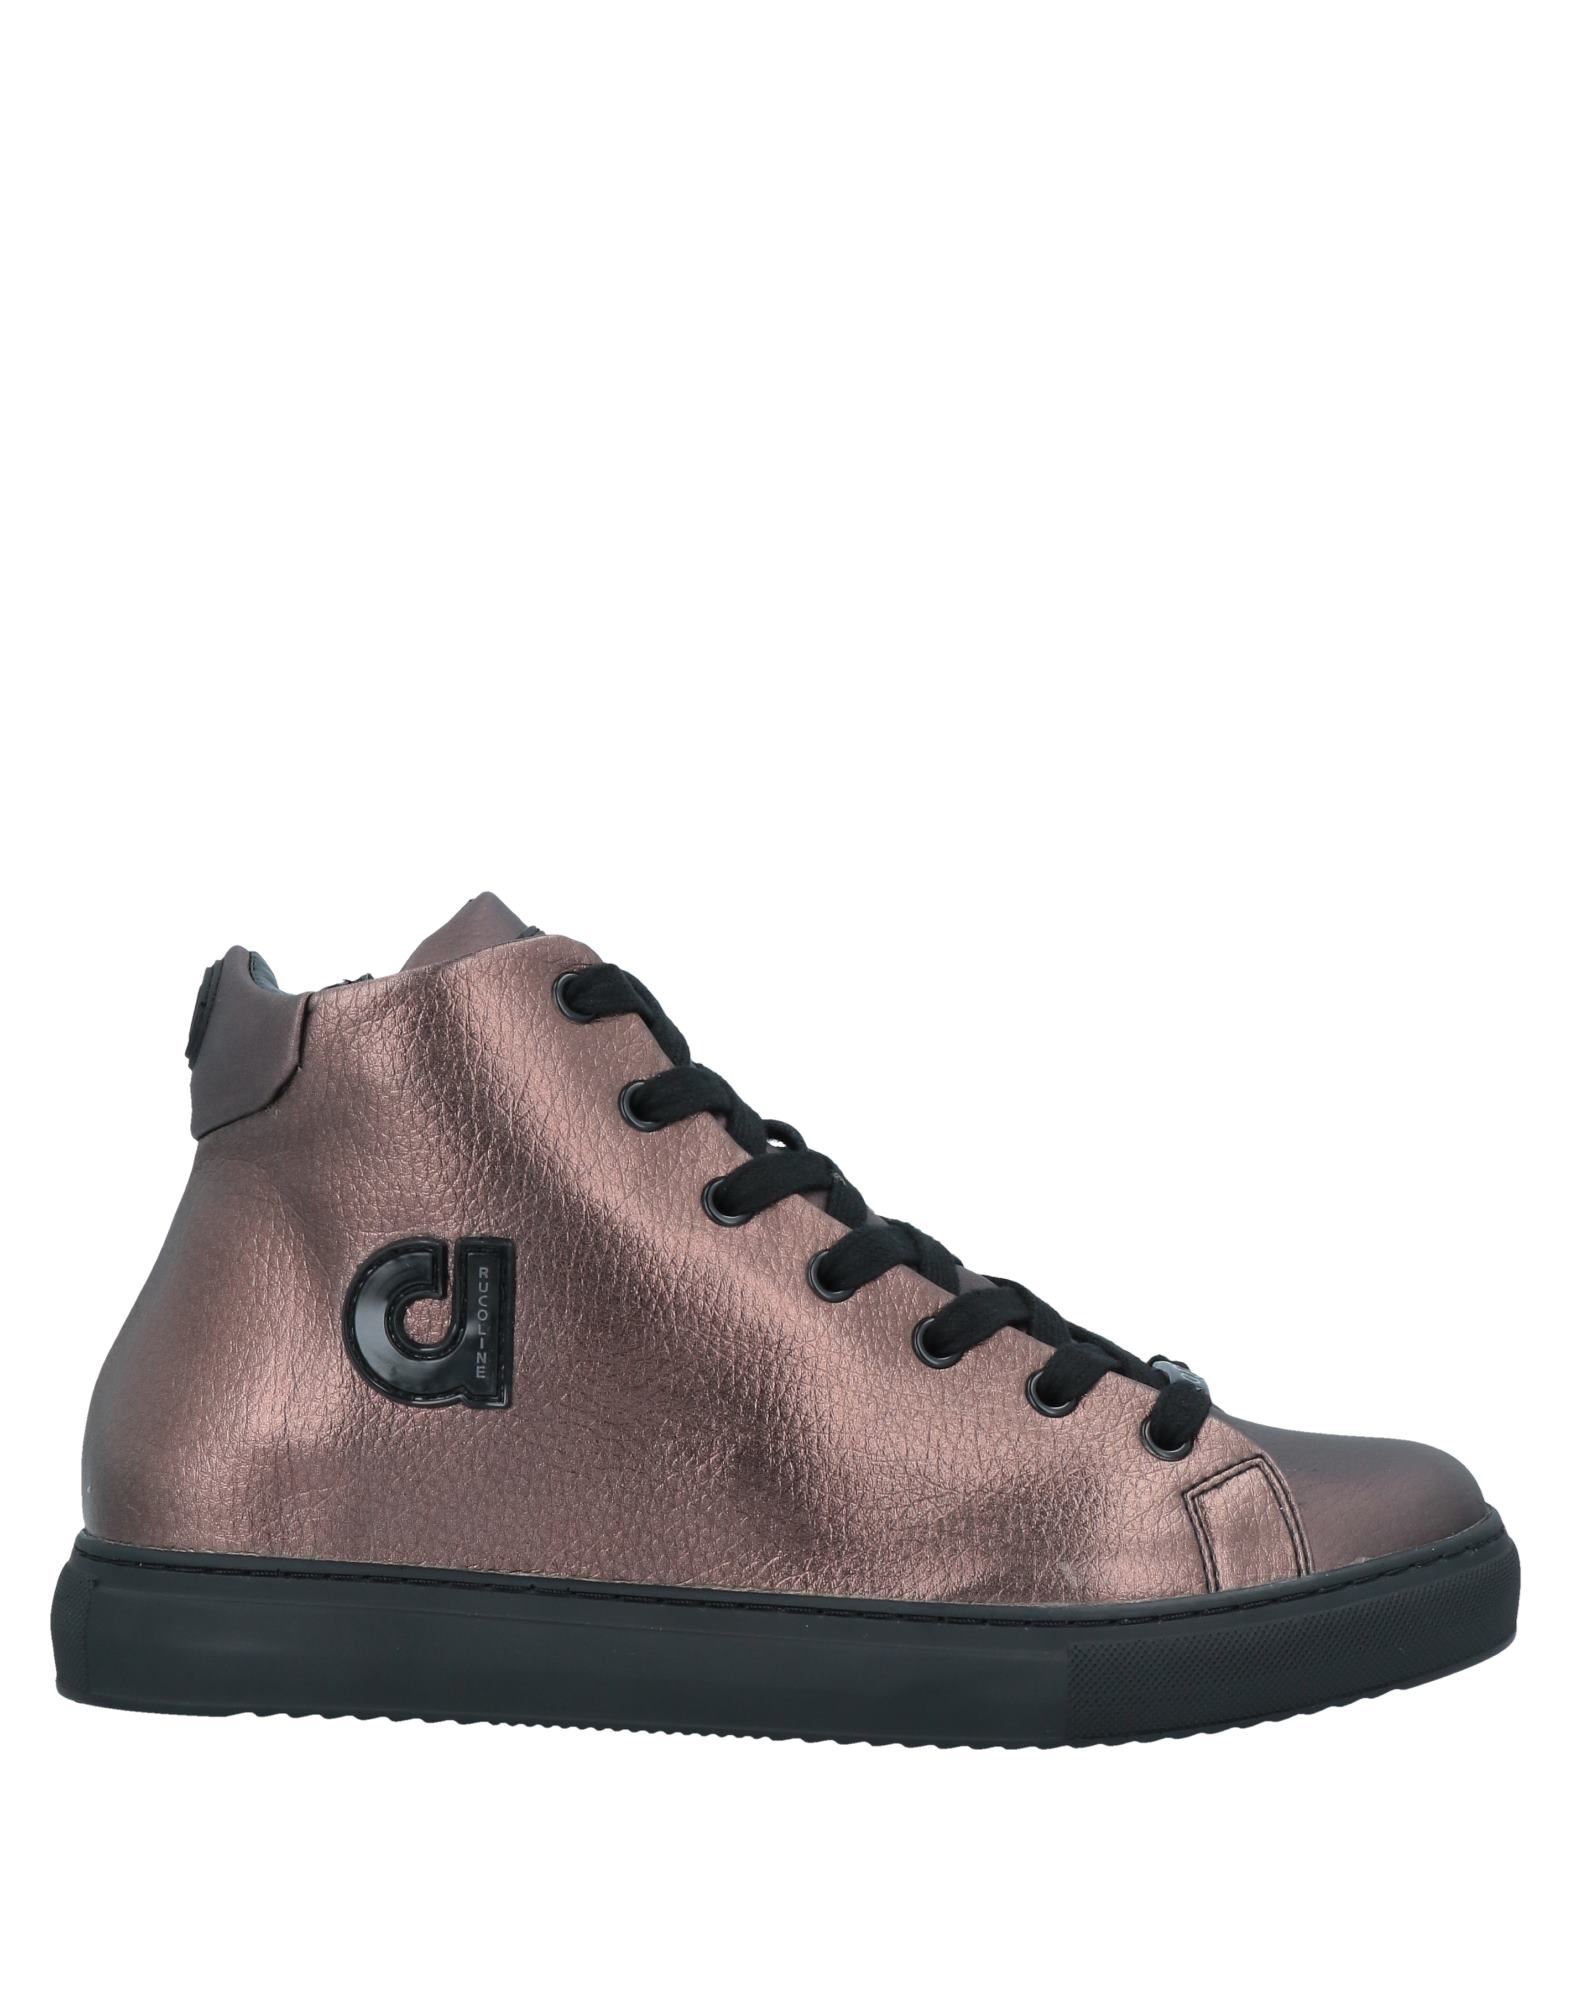 Agile By Rucoline Sneakers In Cocoa